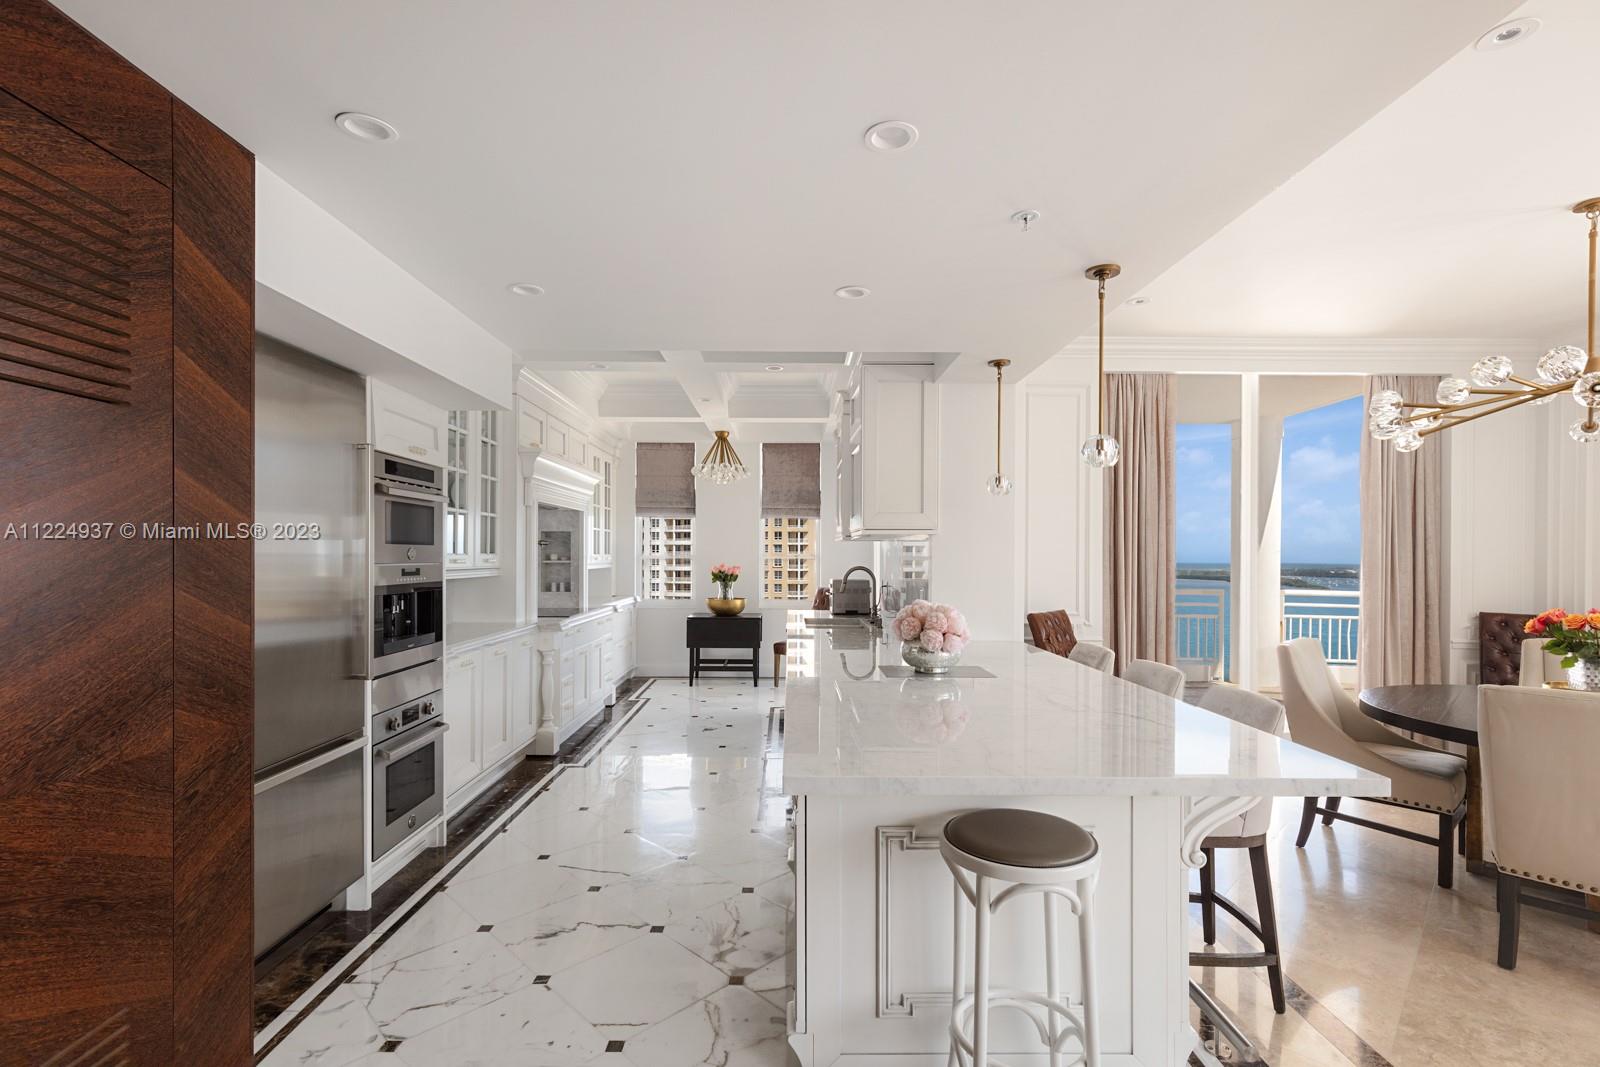 Calacatta Marble floor throughout the home, designed by professional architect Alan Malouf.